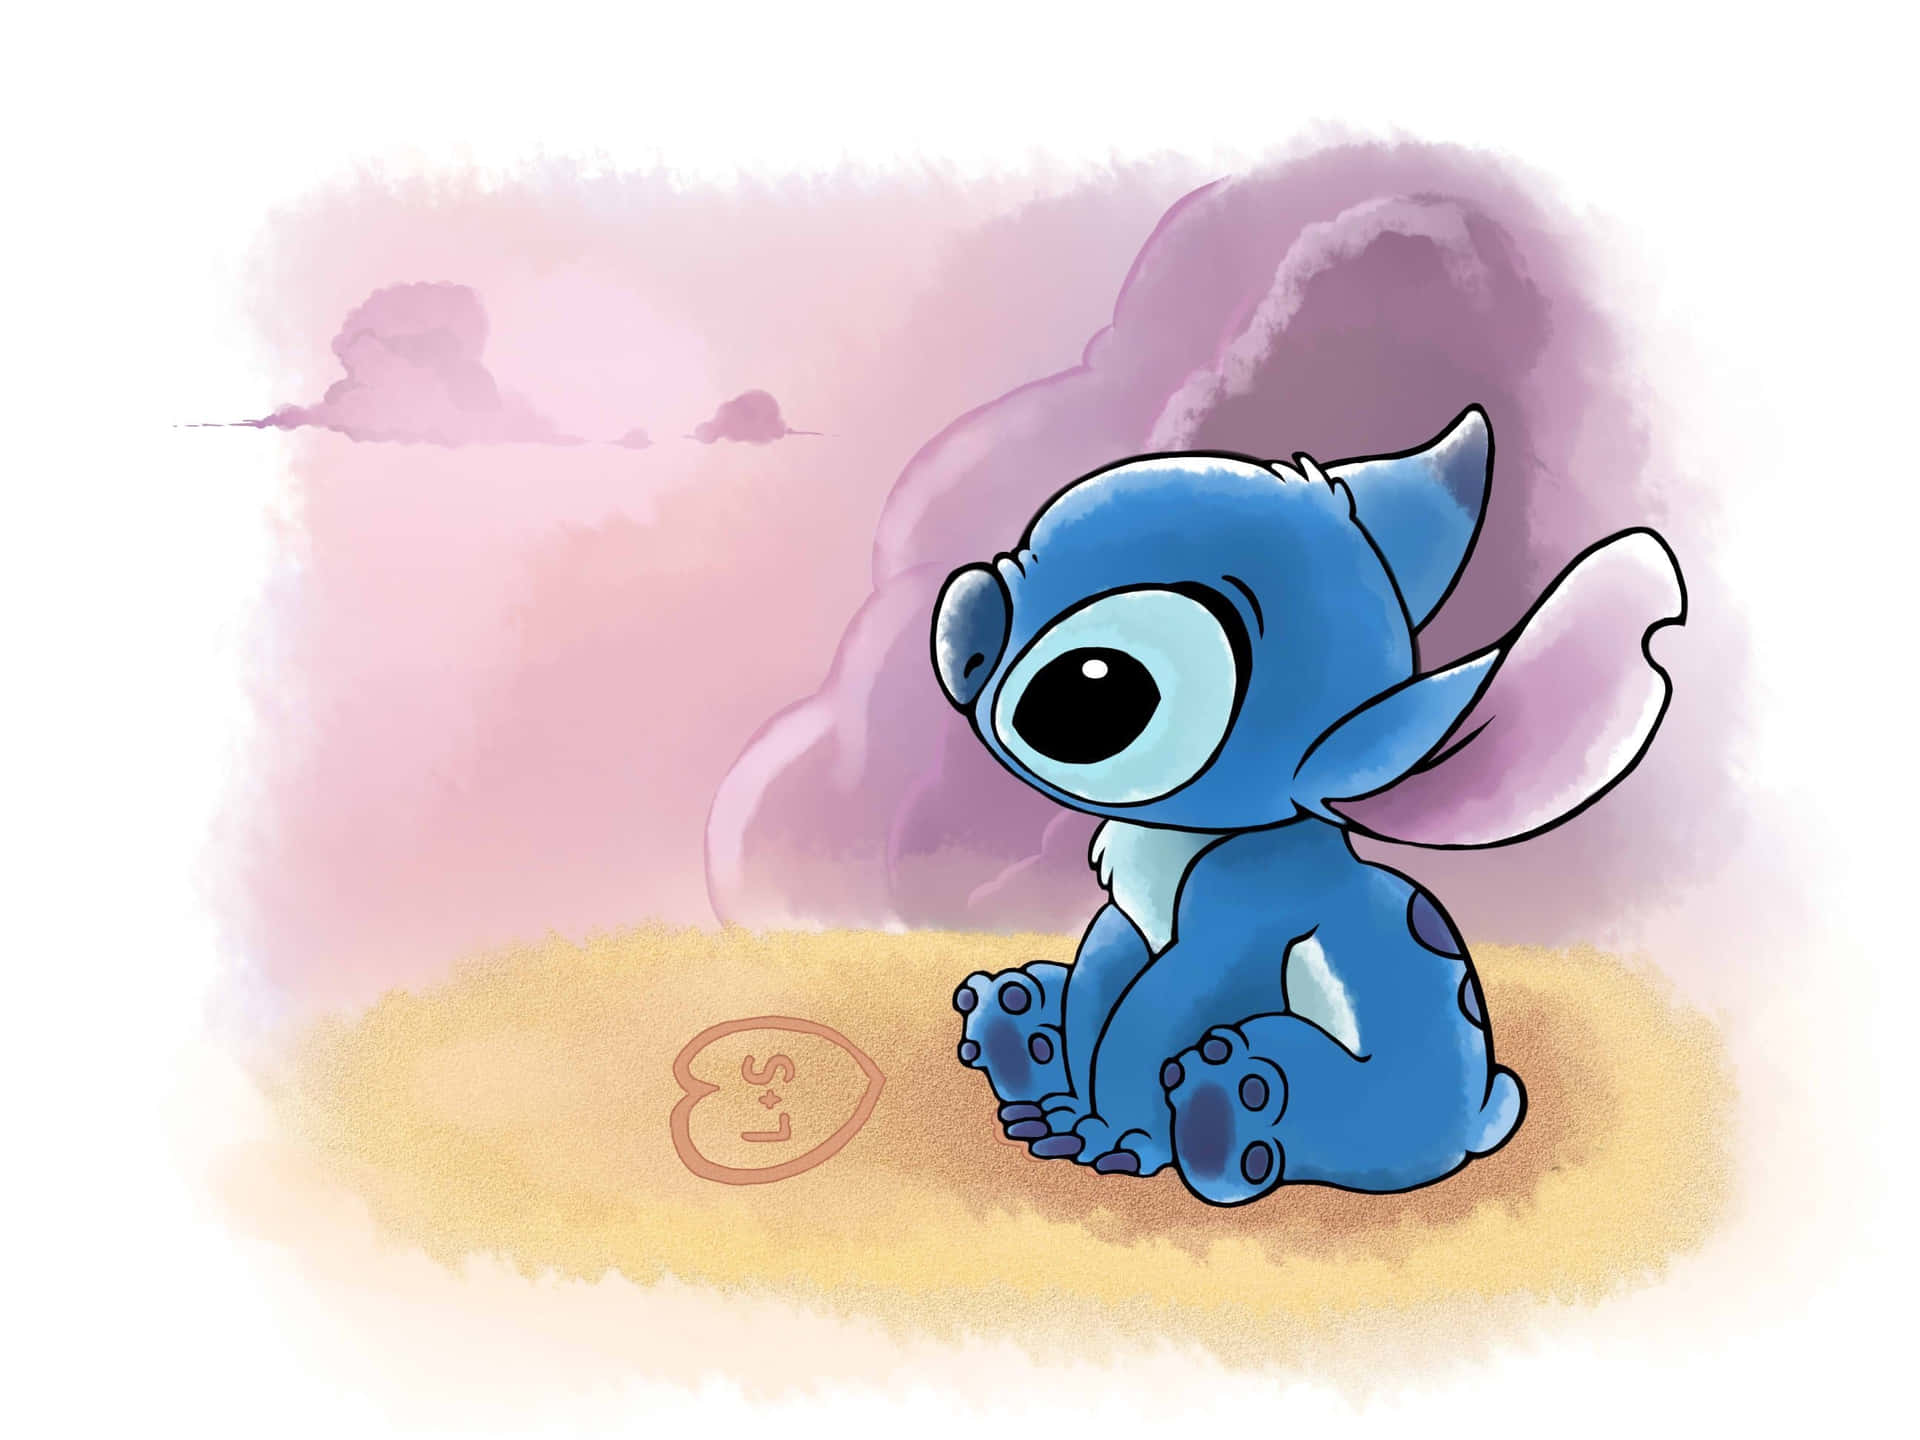 100+] Baby Stitch Wallpapers